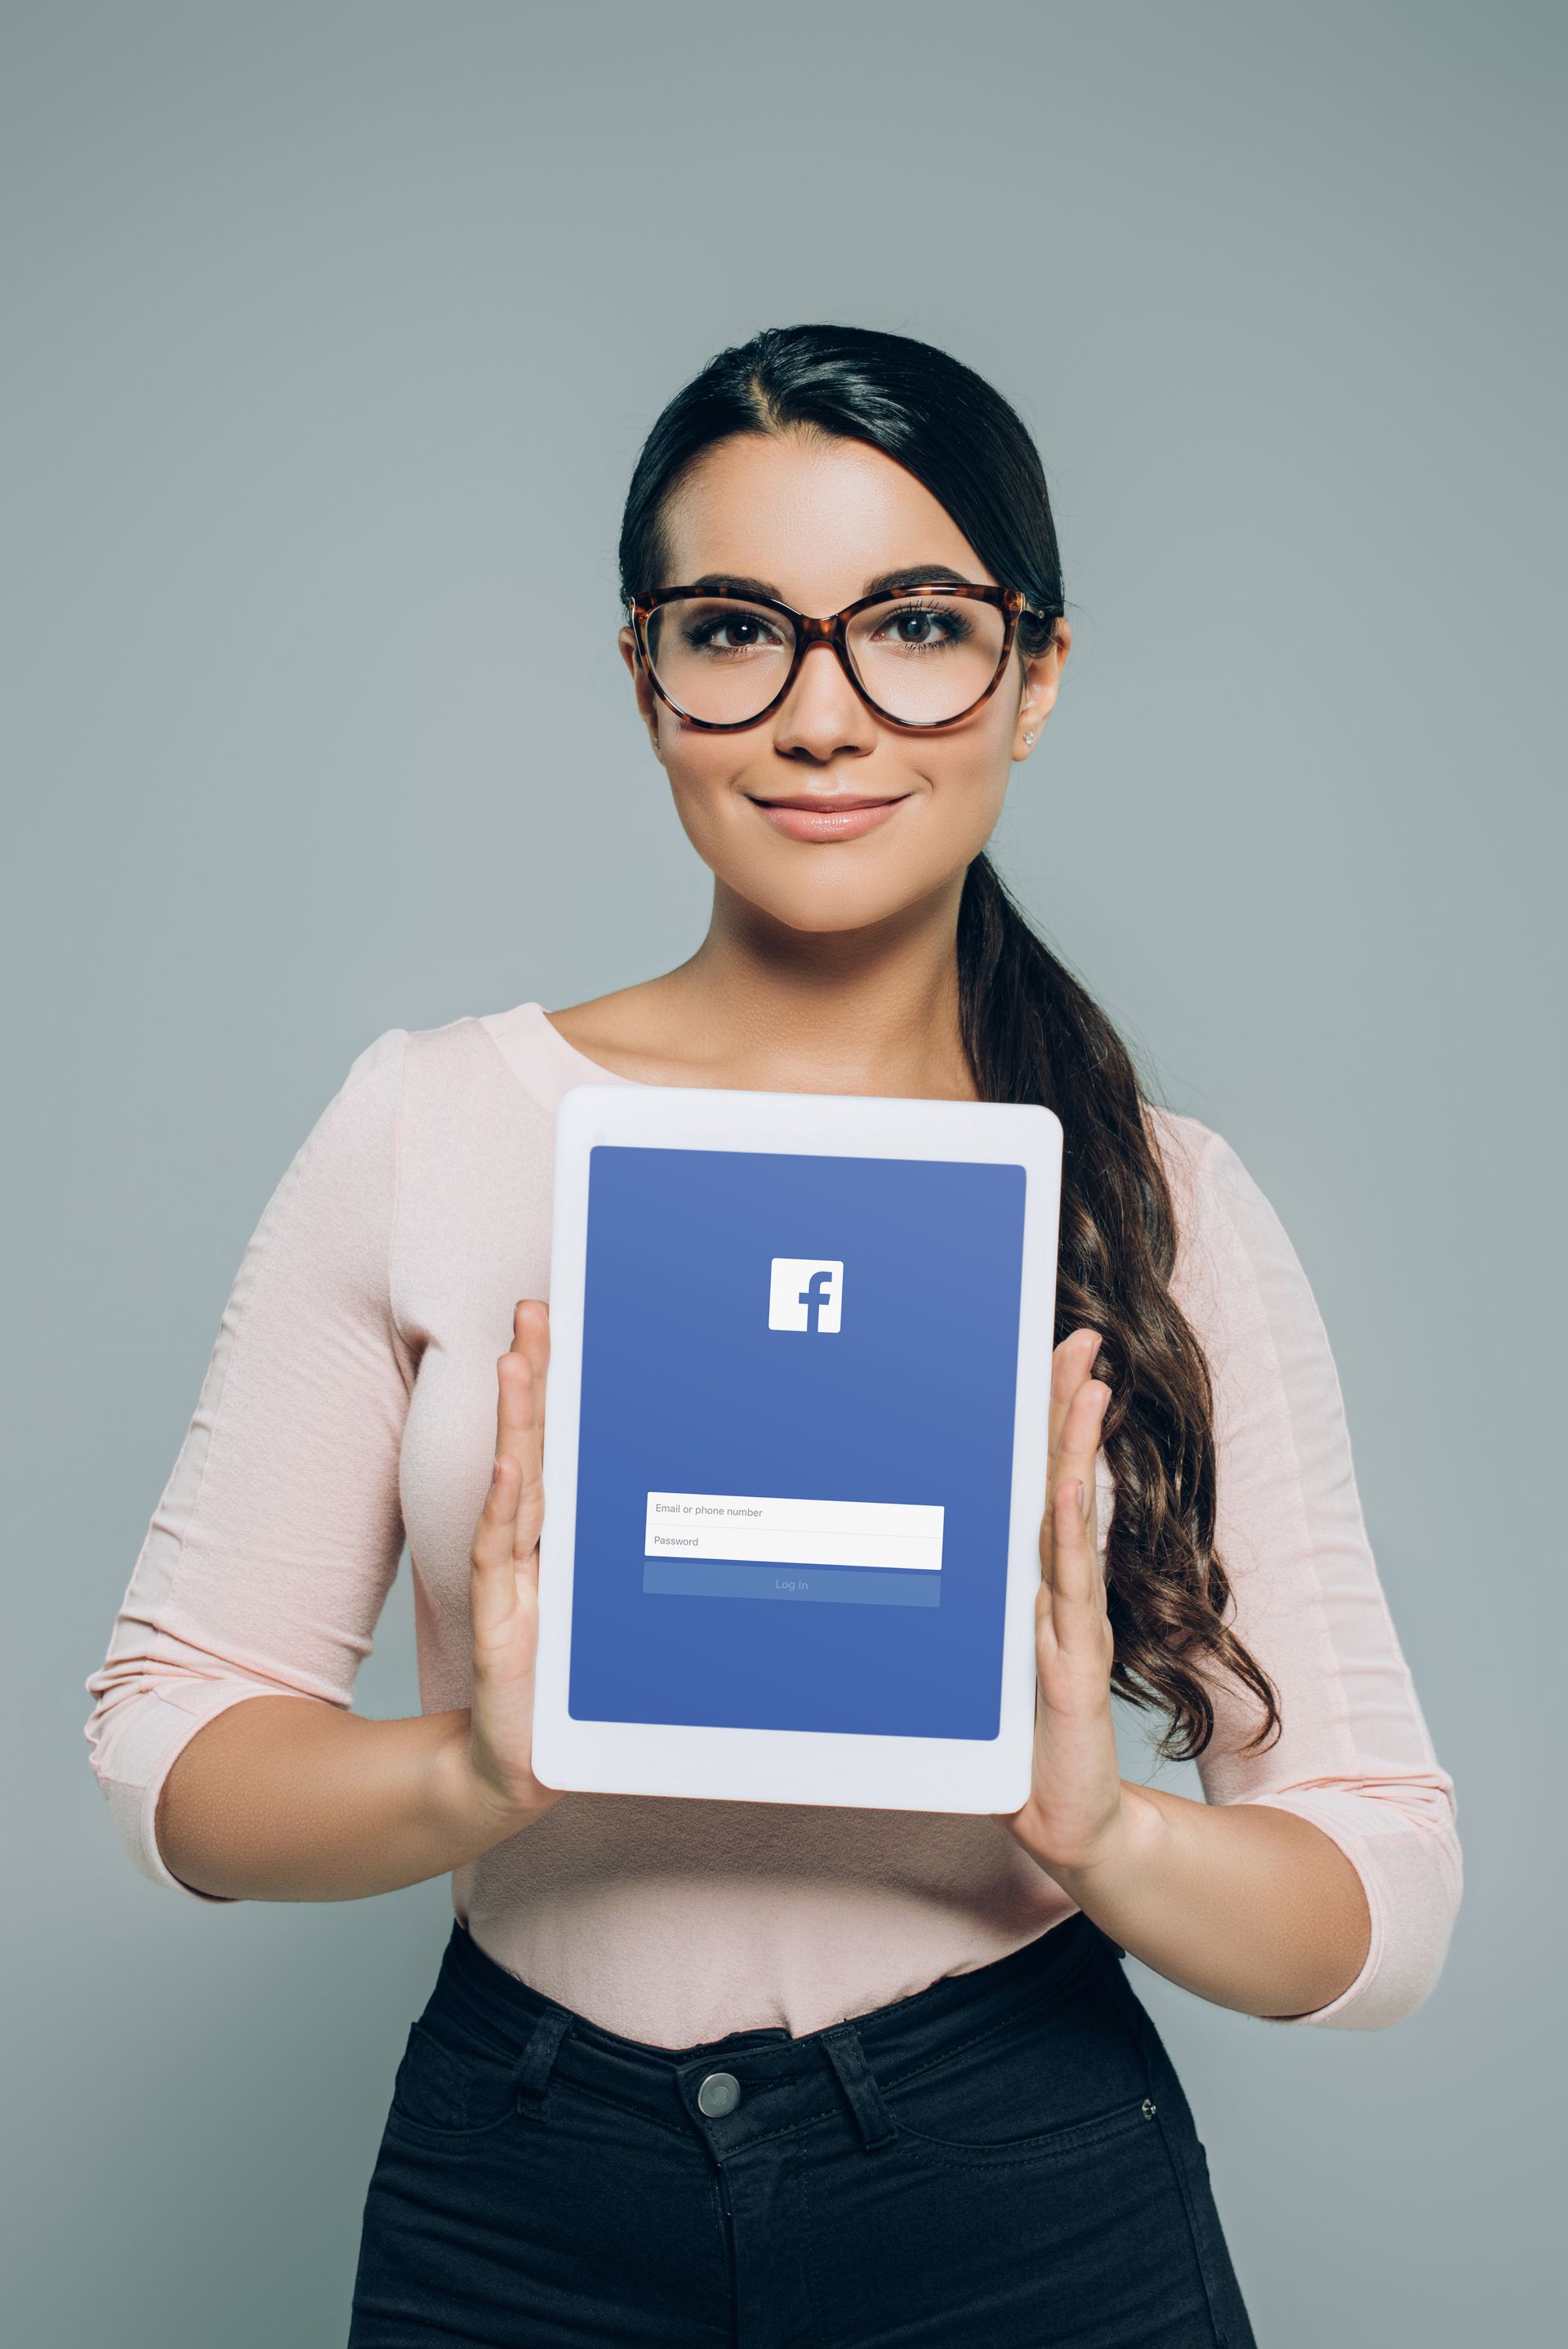 Woman with glasses holding a tablet with facebook icon on it